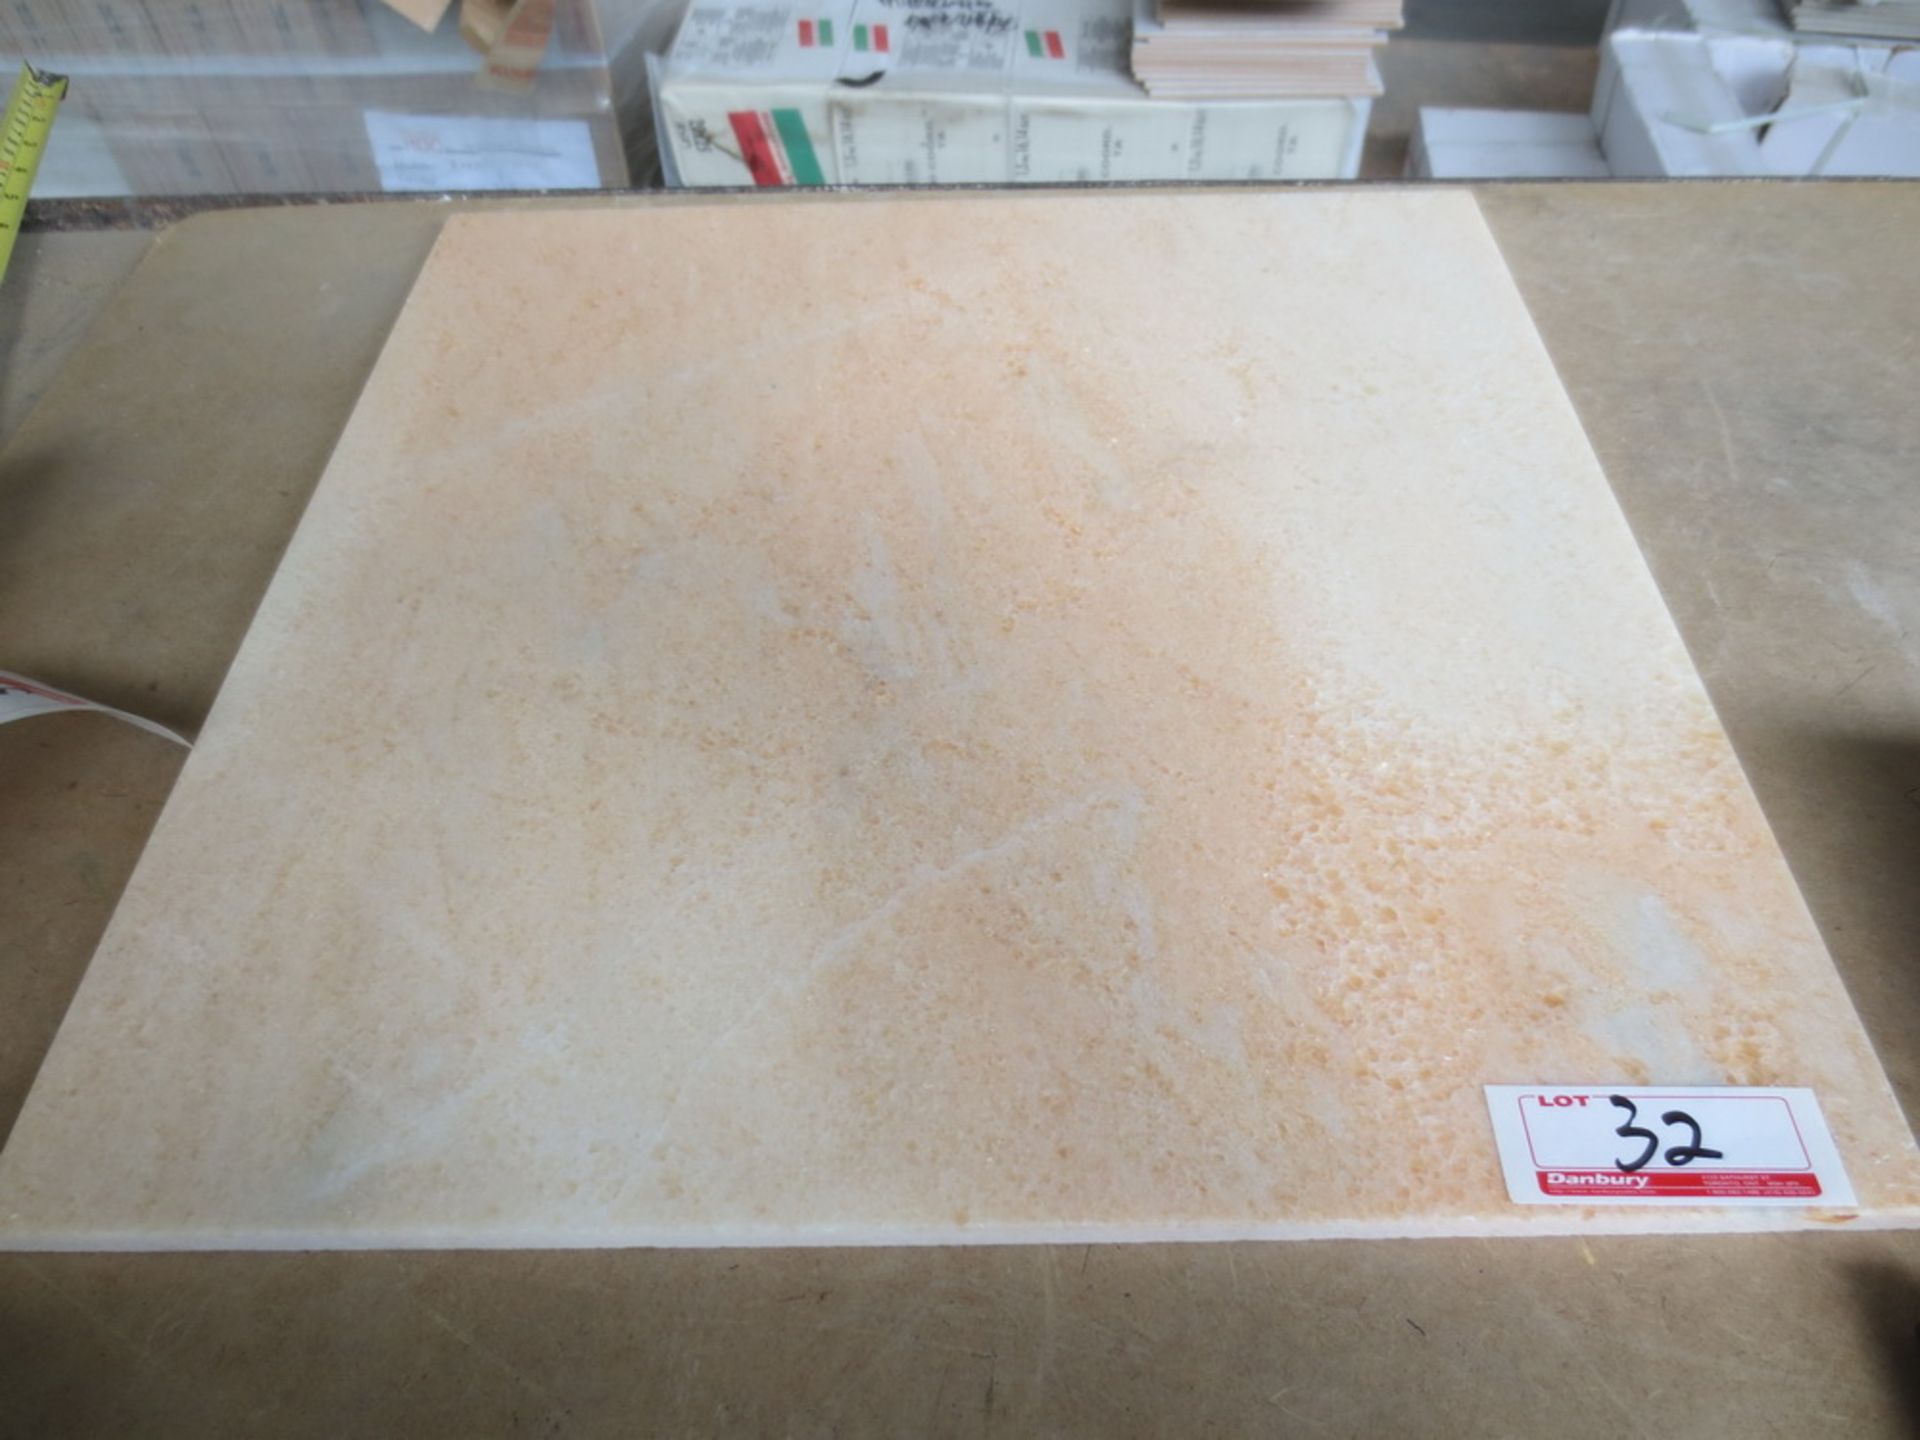 213 - SQ. FT. ROSA CRYSTAL LIGHT APPROX 16X16 GRANITE TILE 20 BOXES